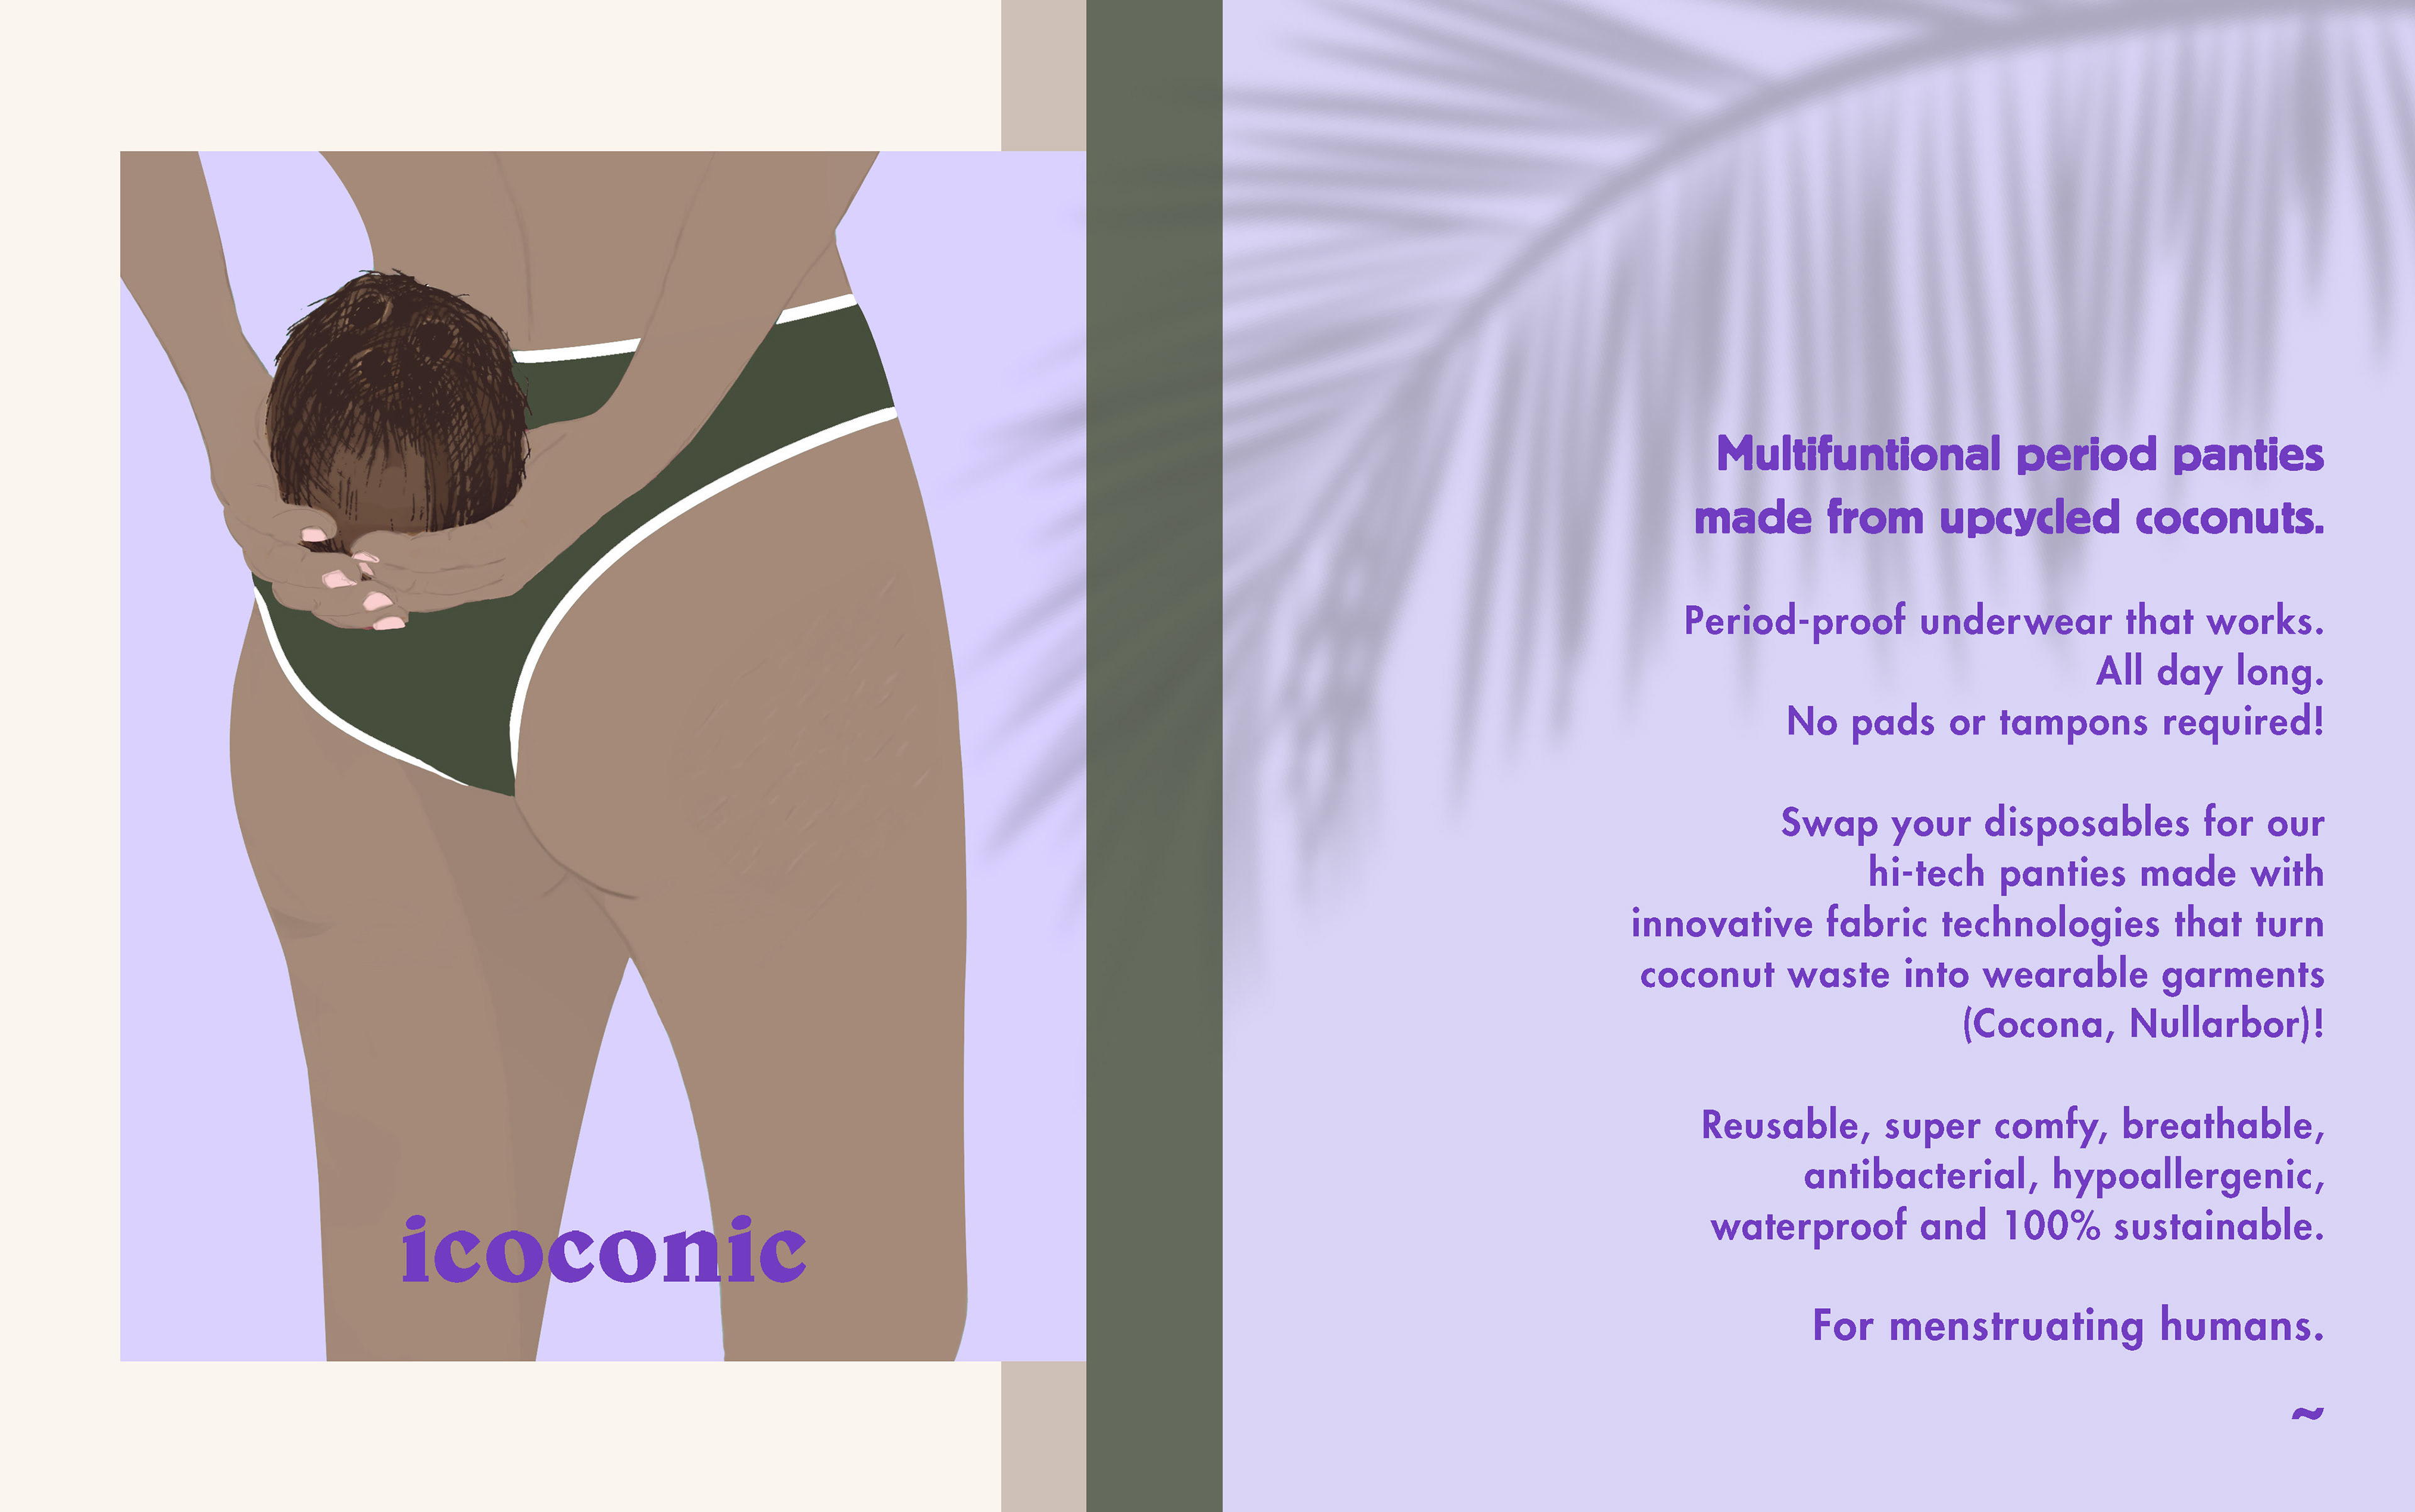 Juliana J. Schneider - Menstrual underwear made from up-cycled coconuts